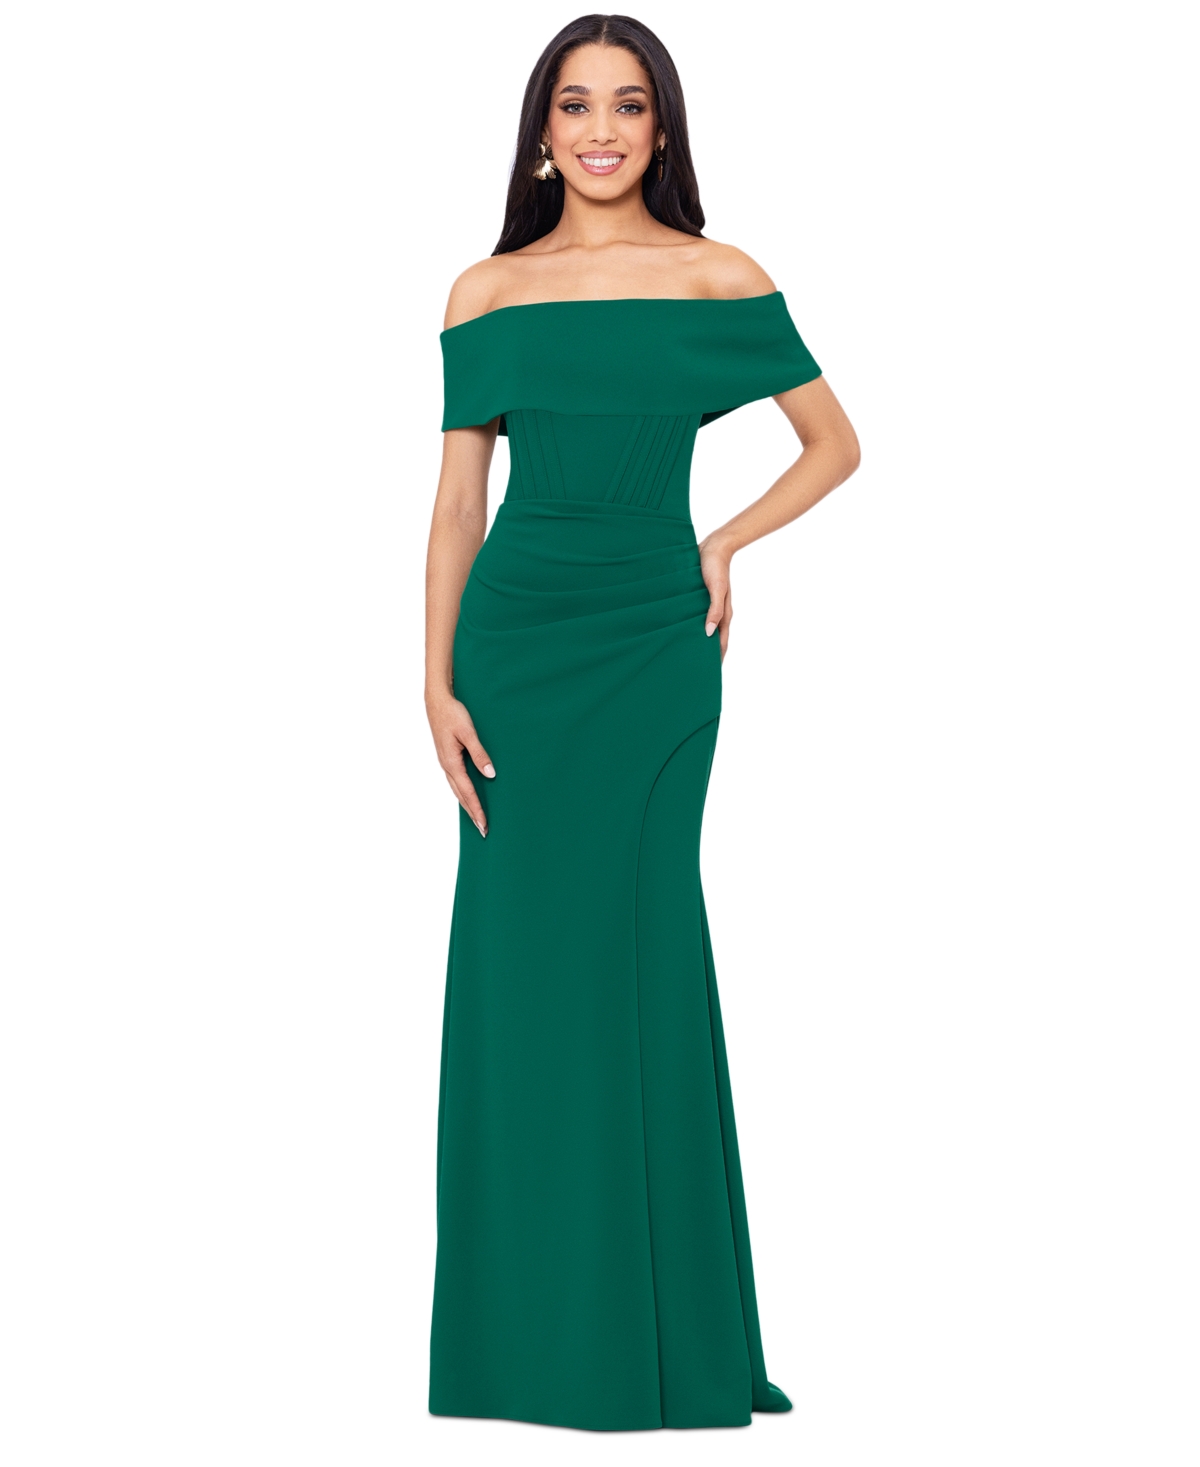 Women's Off-The-Shoulder Front-Slit Gown - Green